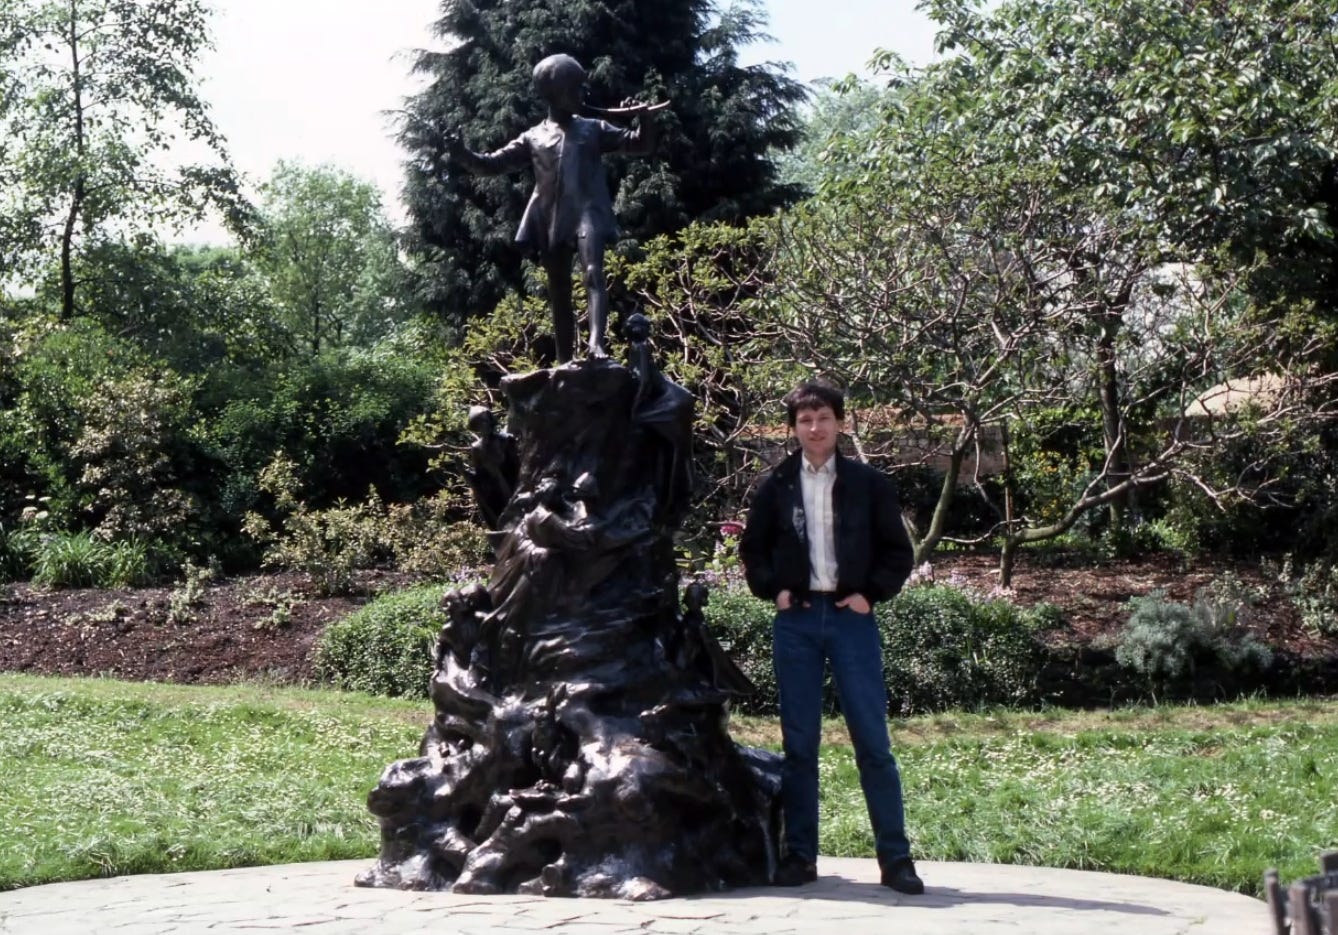 Brian Moriarty standing next to the Peter Pan statue in Kensington Gardens, London.